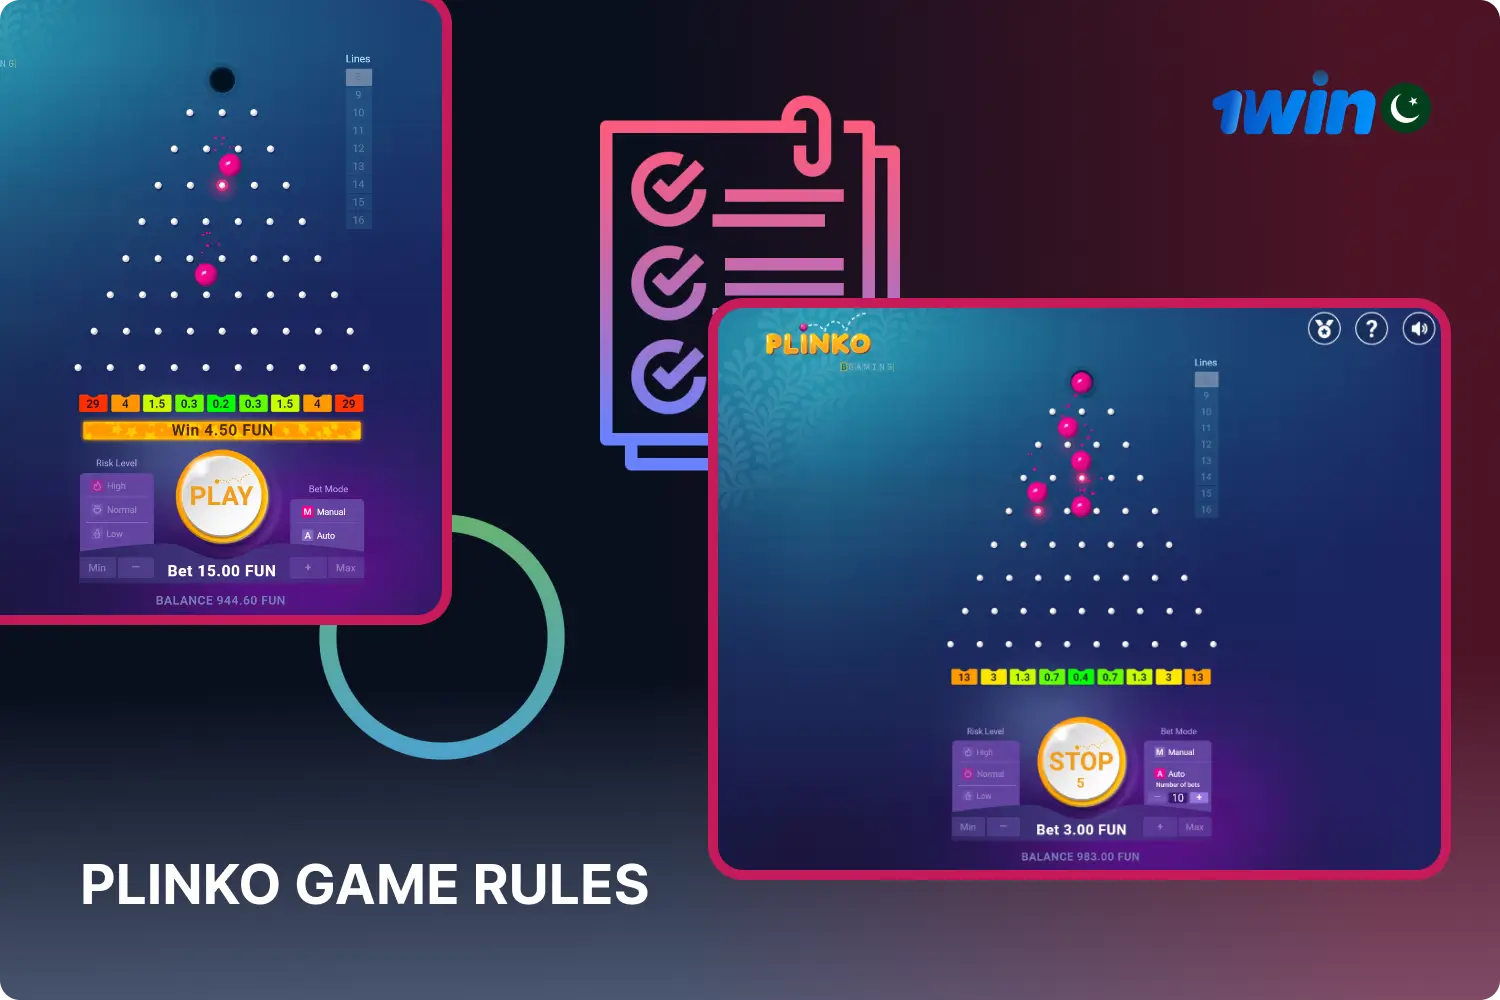 The Plinko 1win game has fairly simple rules; users should familiarize themselves with them before starting to play for real money, and they can practice in demo modes